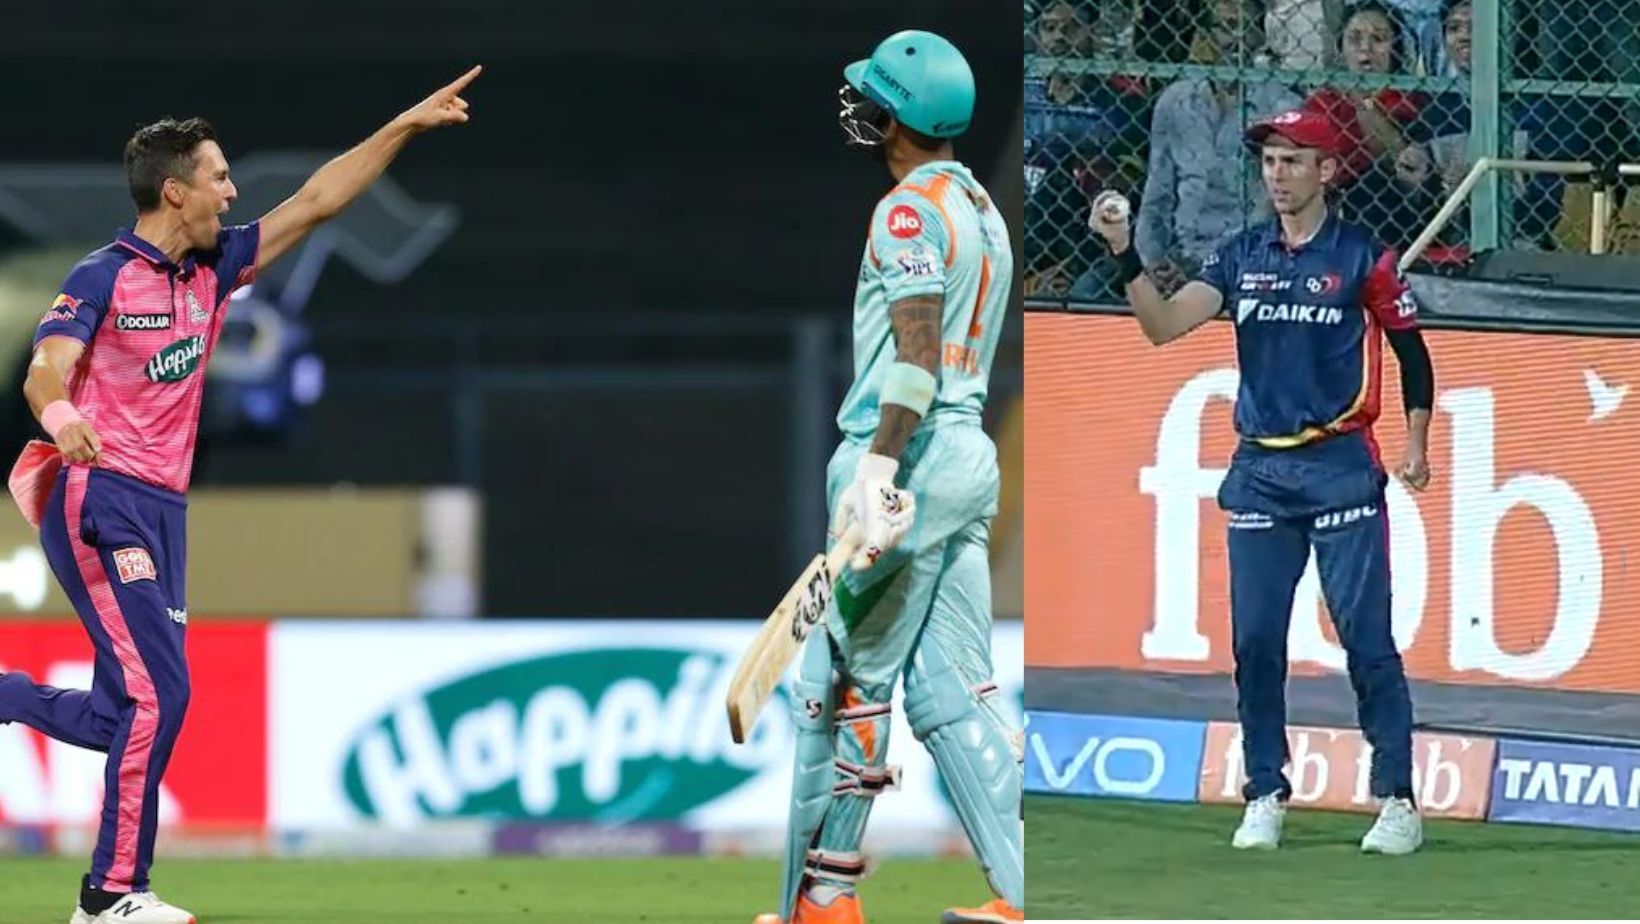 Trent Boult has his share of brilliant moments in the IPL.